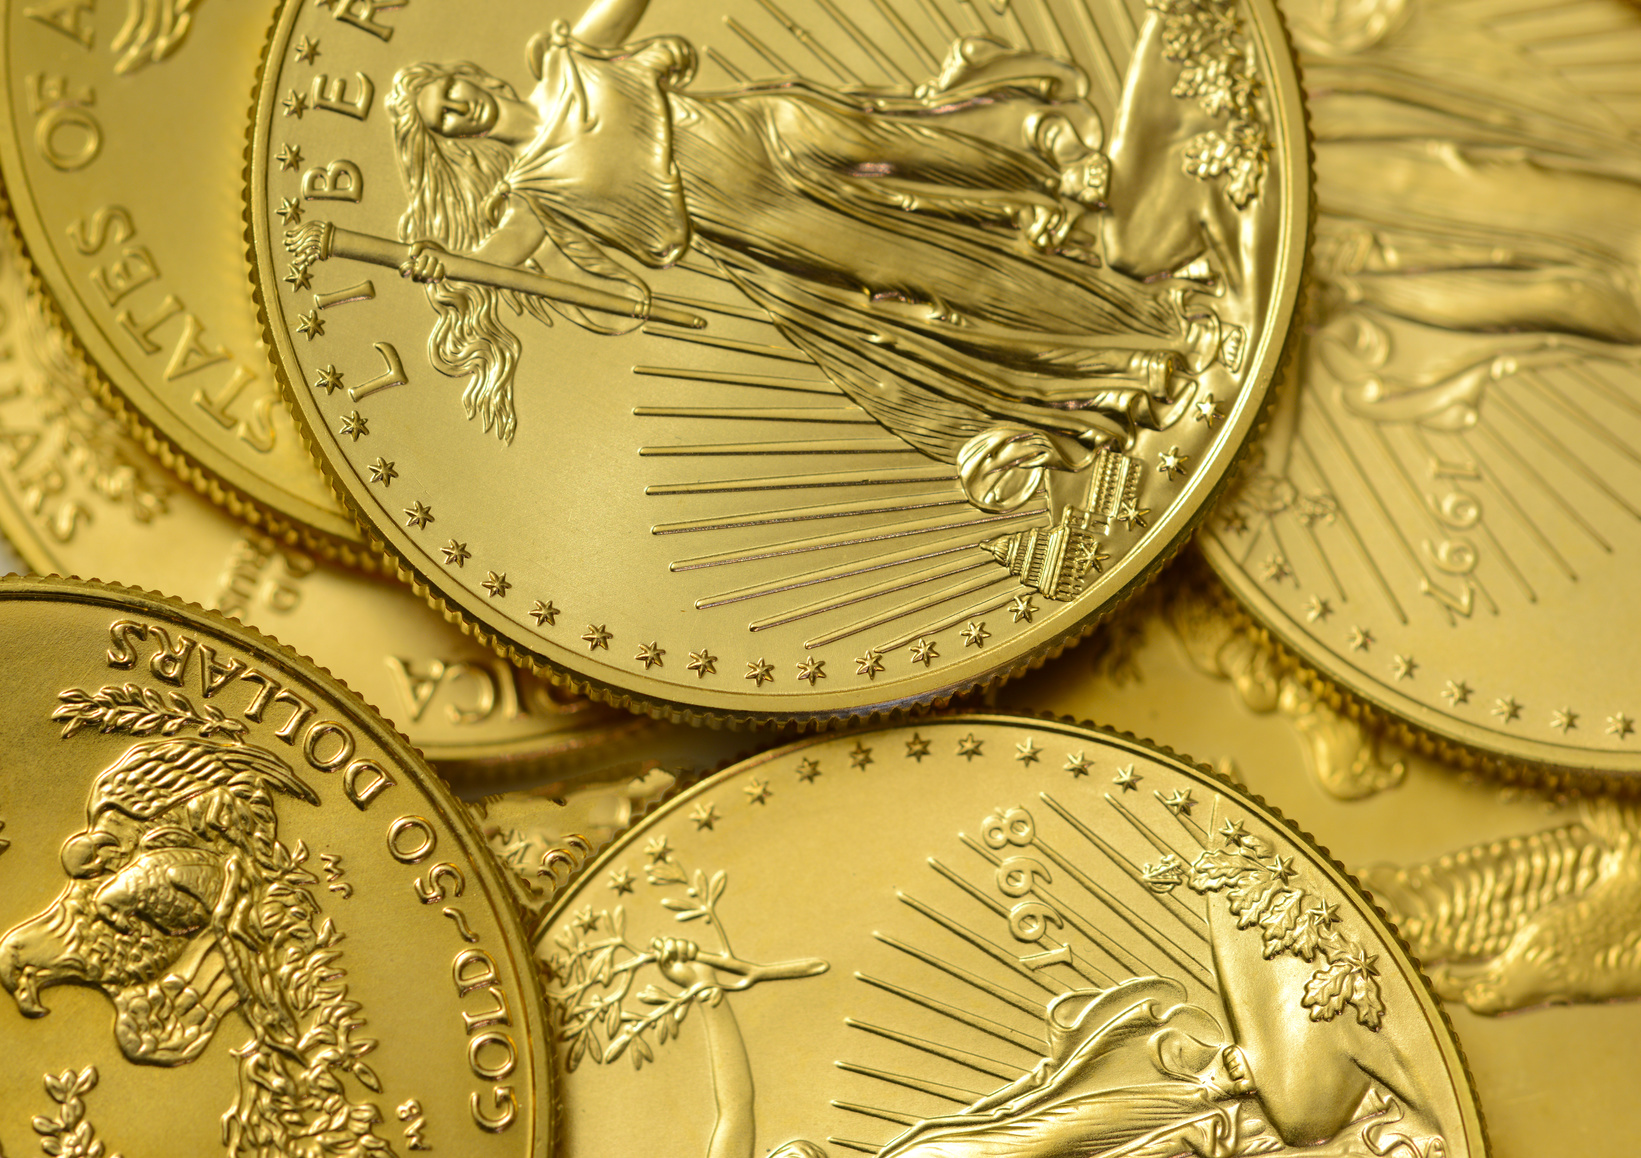 Bitcoin or gold? The coronavirus has proven which the better safe haven asset is, says analyst